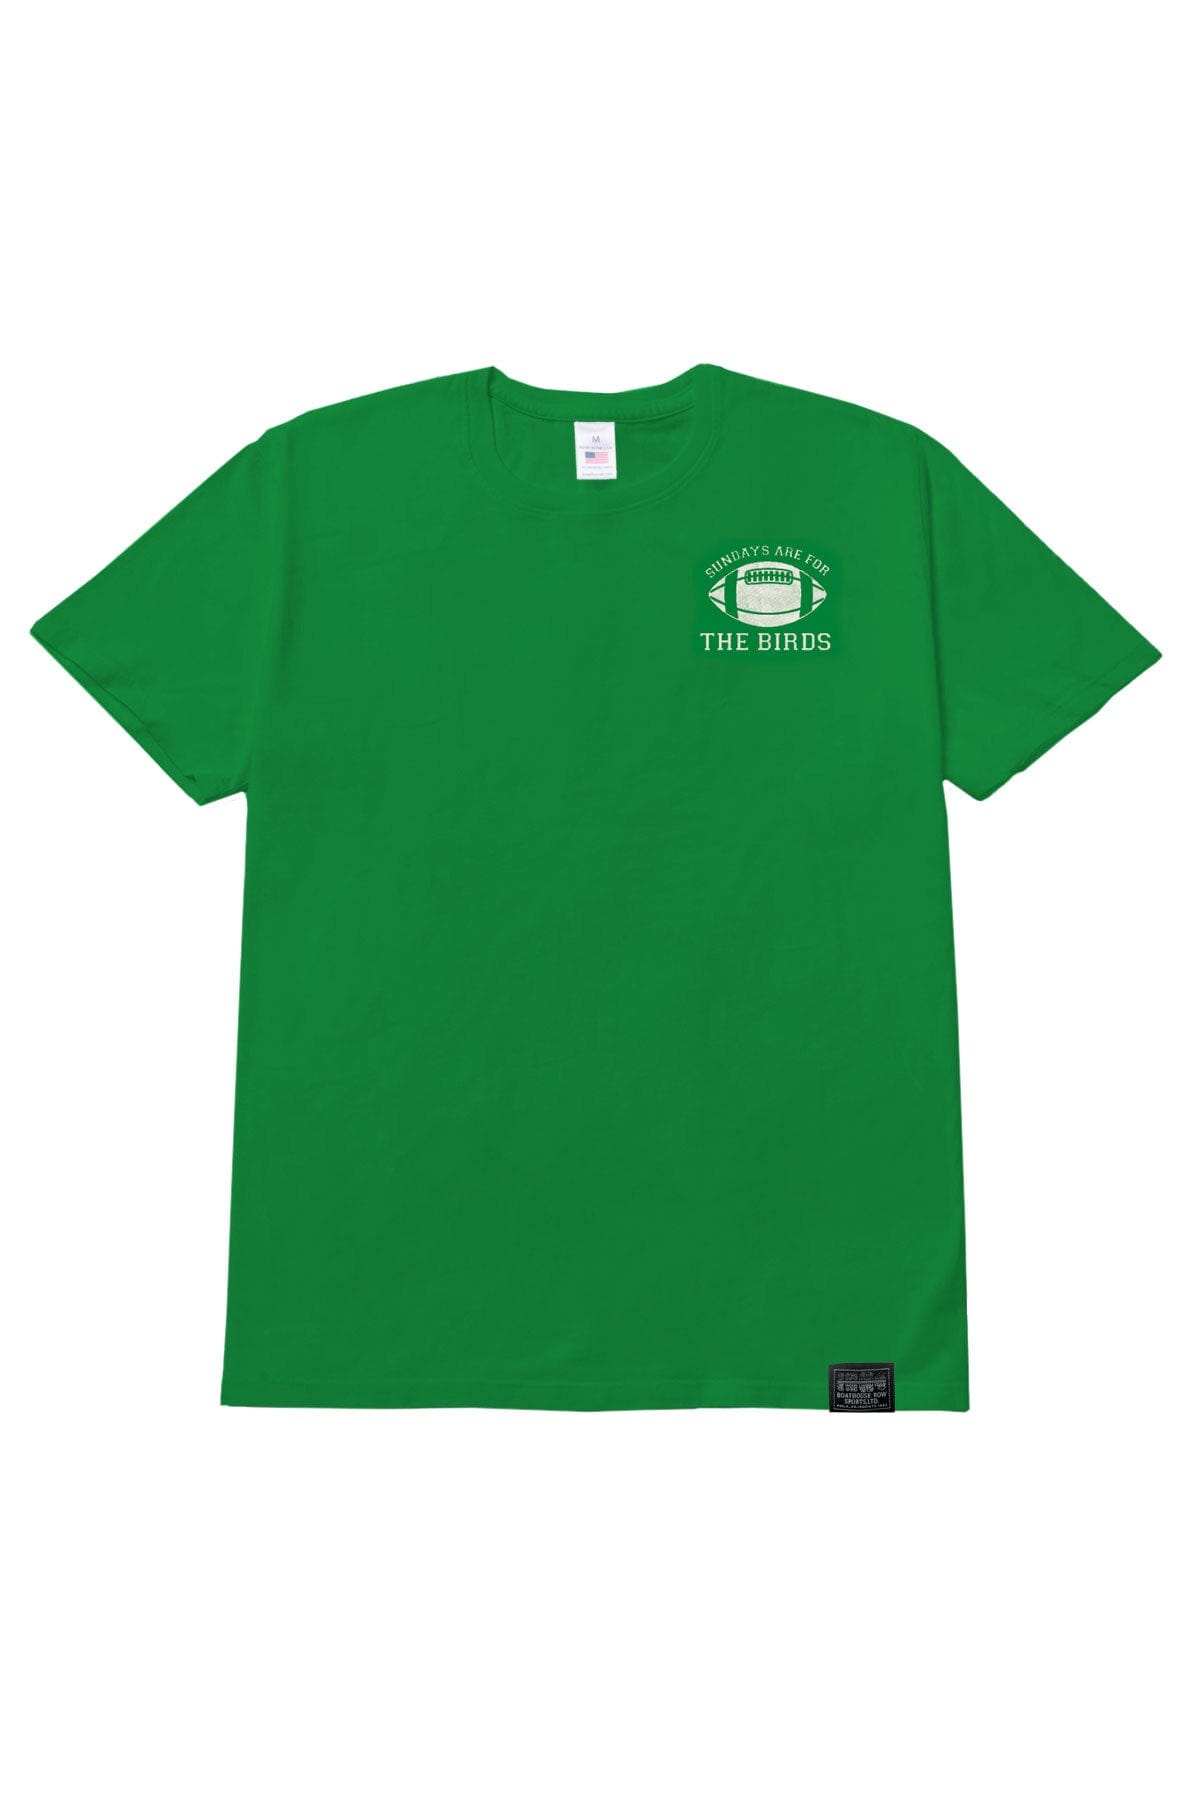 BOATHOUSE "SUNDAYS ARE FOR THE BIRDS" T-SHIRT Kelly Green / Small